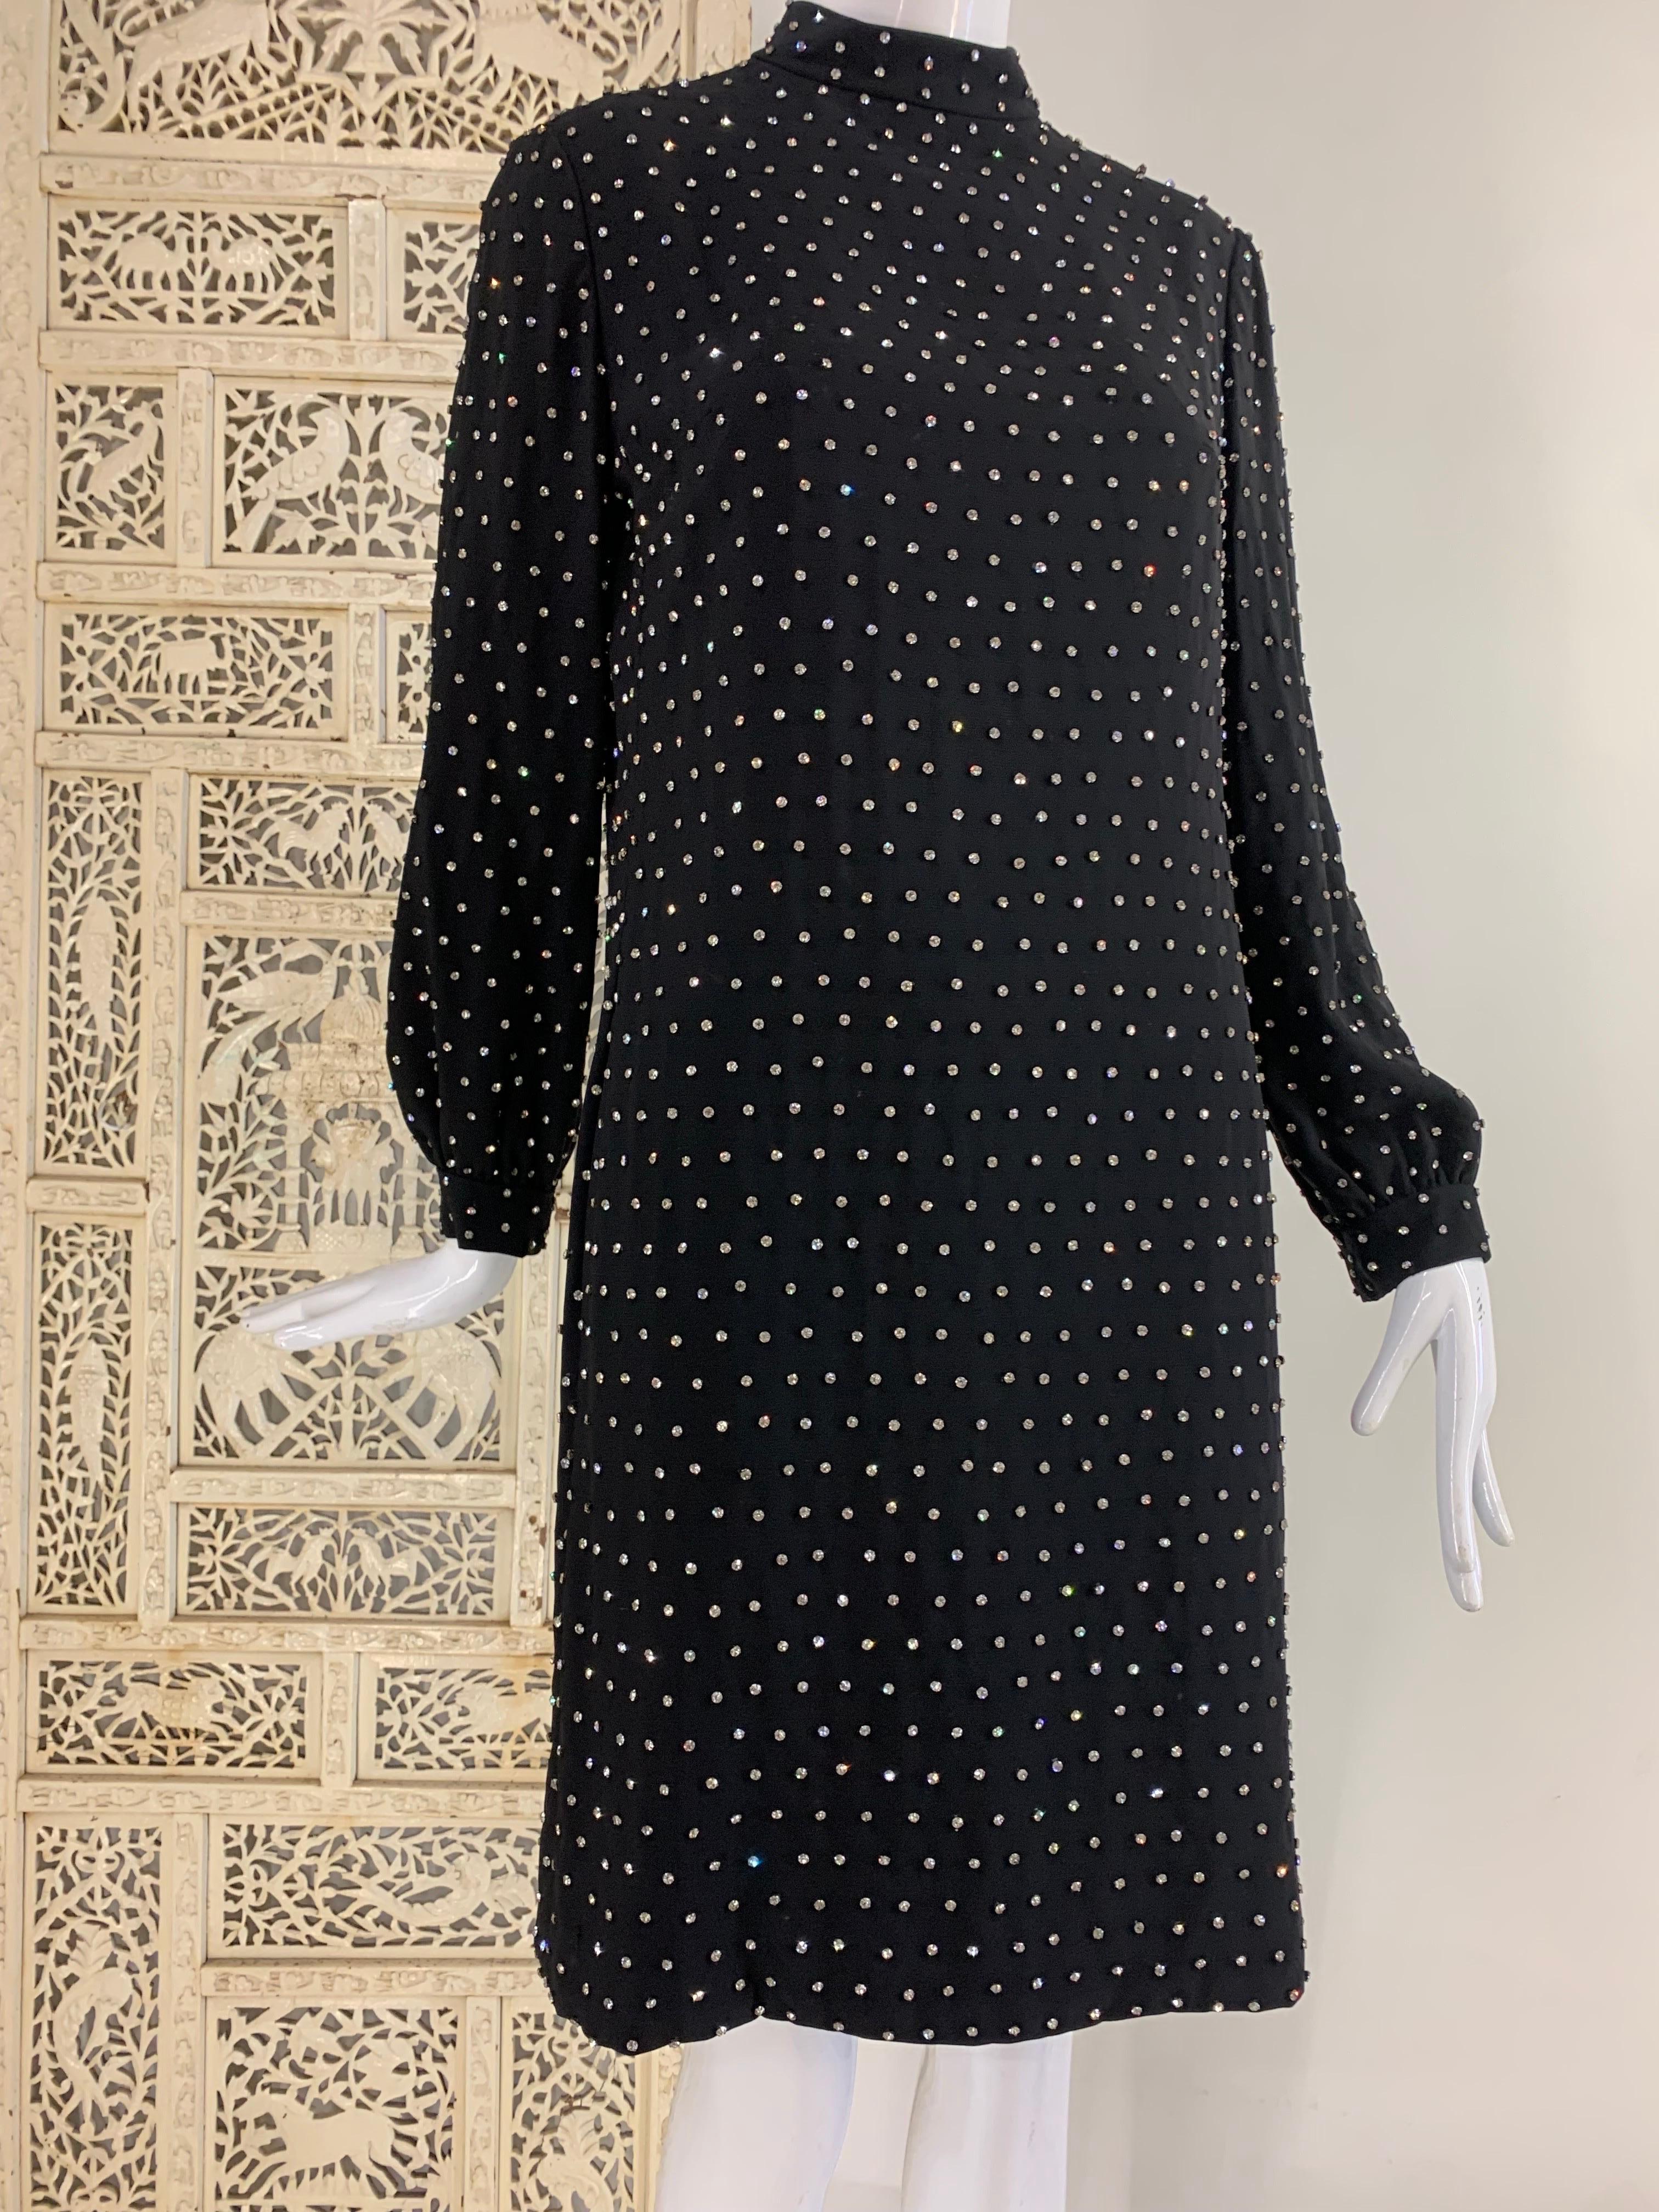 A fabulous 1960s Marie McCarthy for Larry Aldrich black rayon crepe cocktail mini dress:  banded neckline, sleeve gathered into cuff, darted with back zipper.  Fully lined.  Completely covered in hand-sewn rhinestones. Side slit pockets. Fully